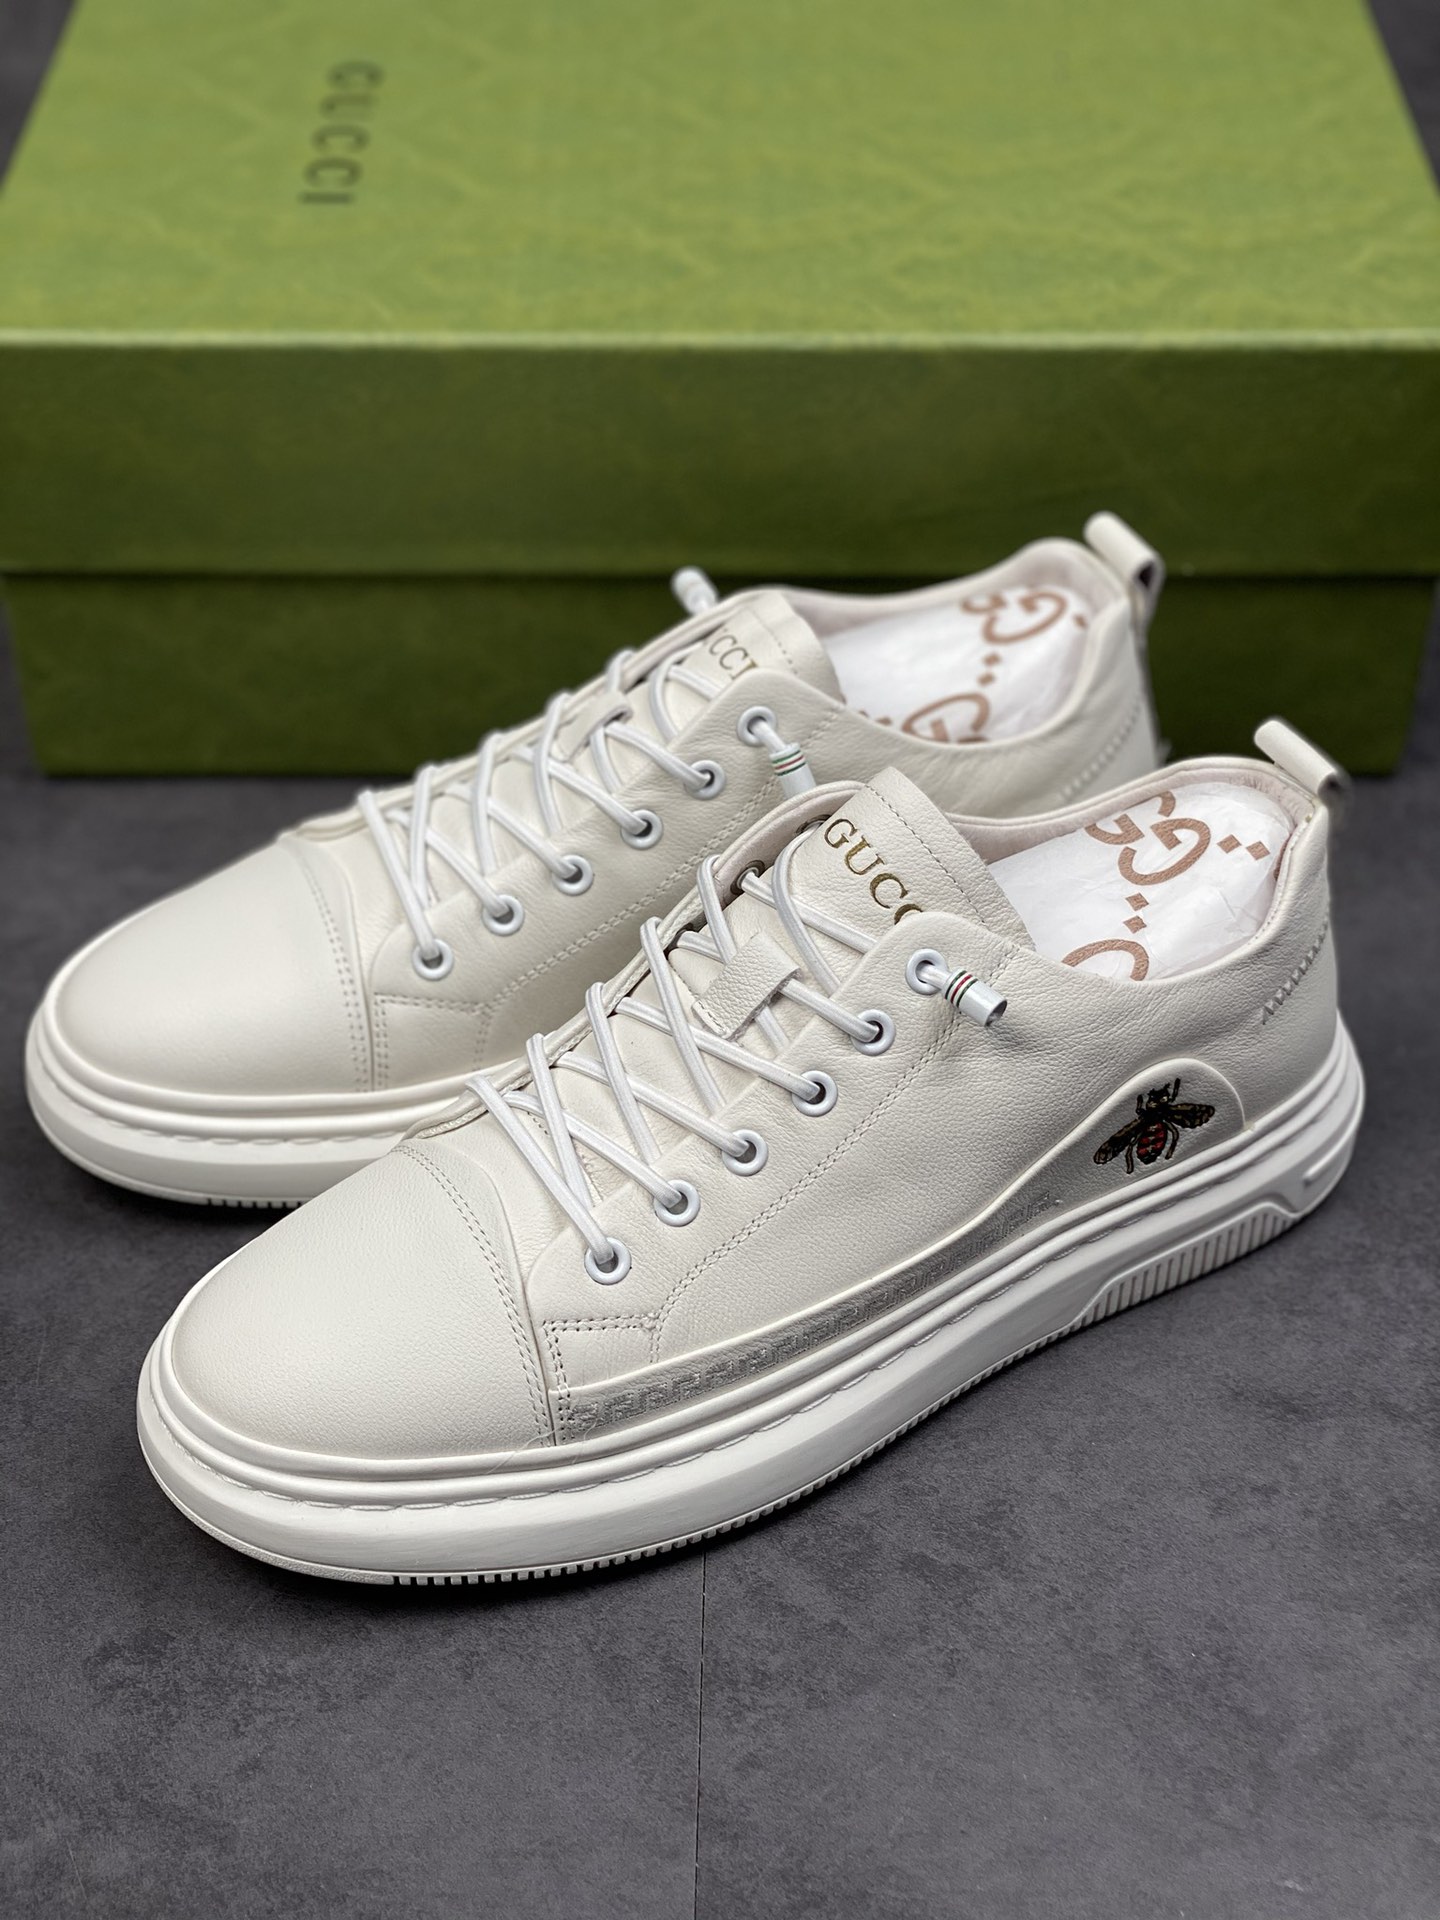 Gucci sports and leisure trend sneakers series Guangdong quality original 22ss spring and summer new style